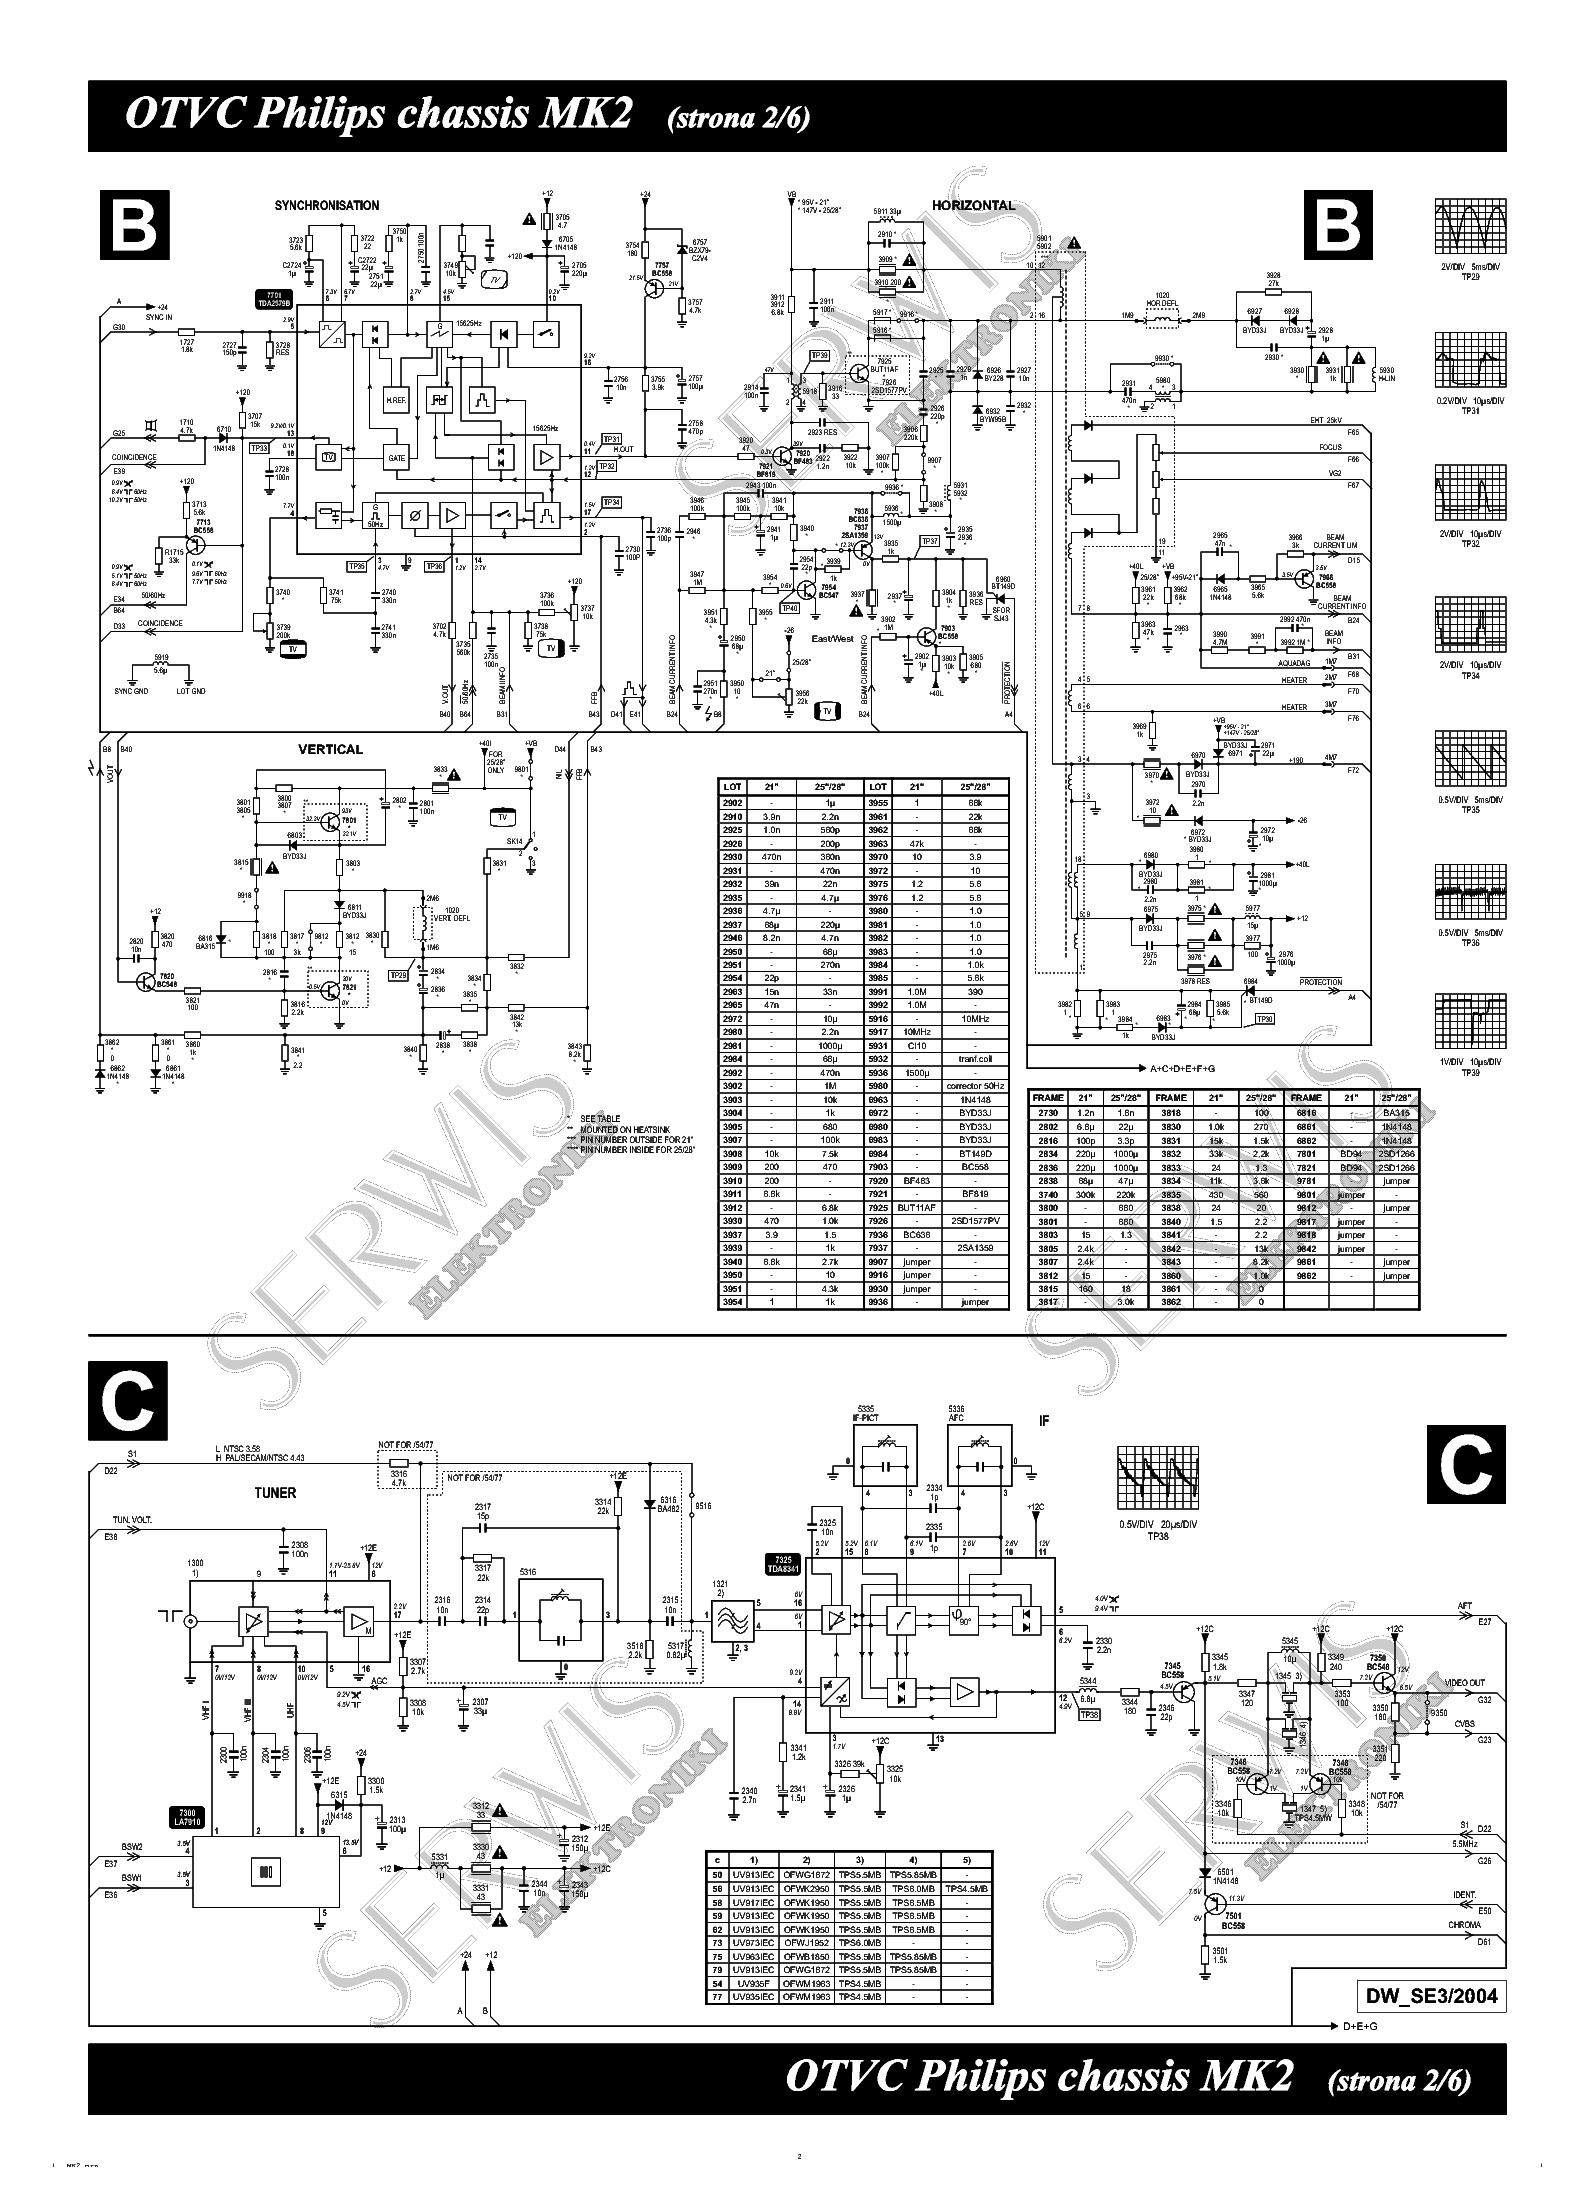 PHILIPS CHASSIS MK2 service manual (2nd page)